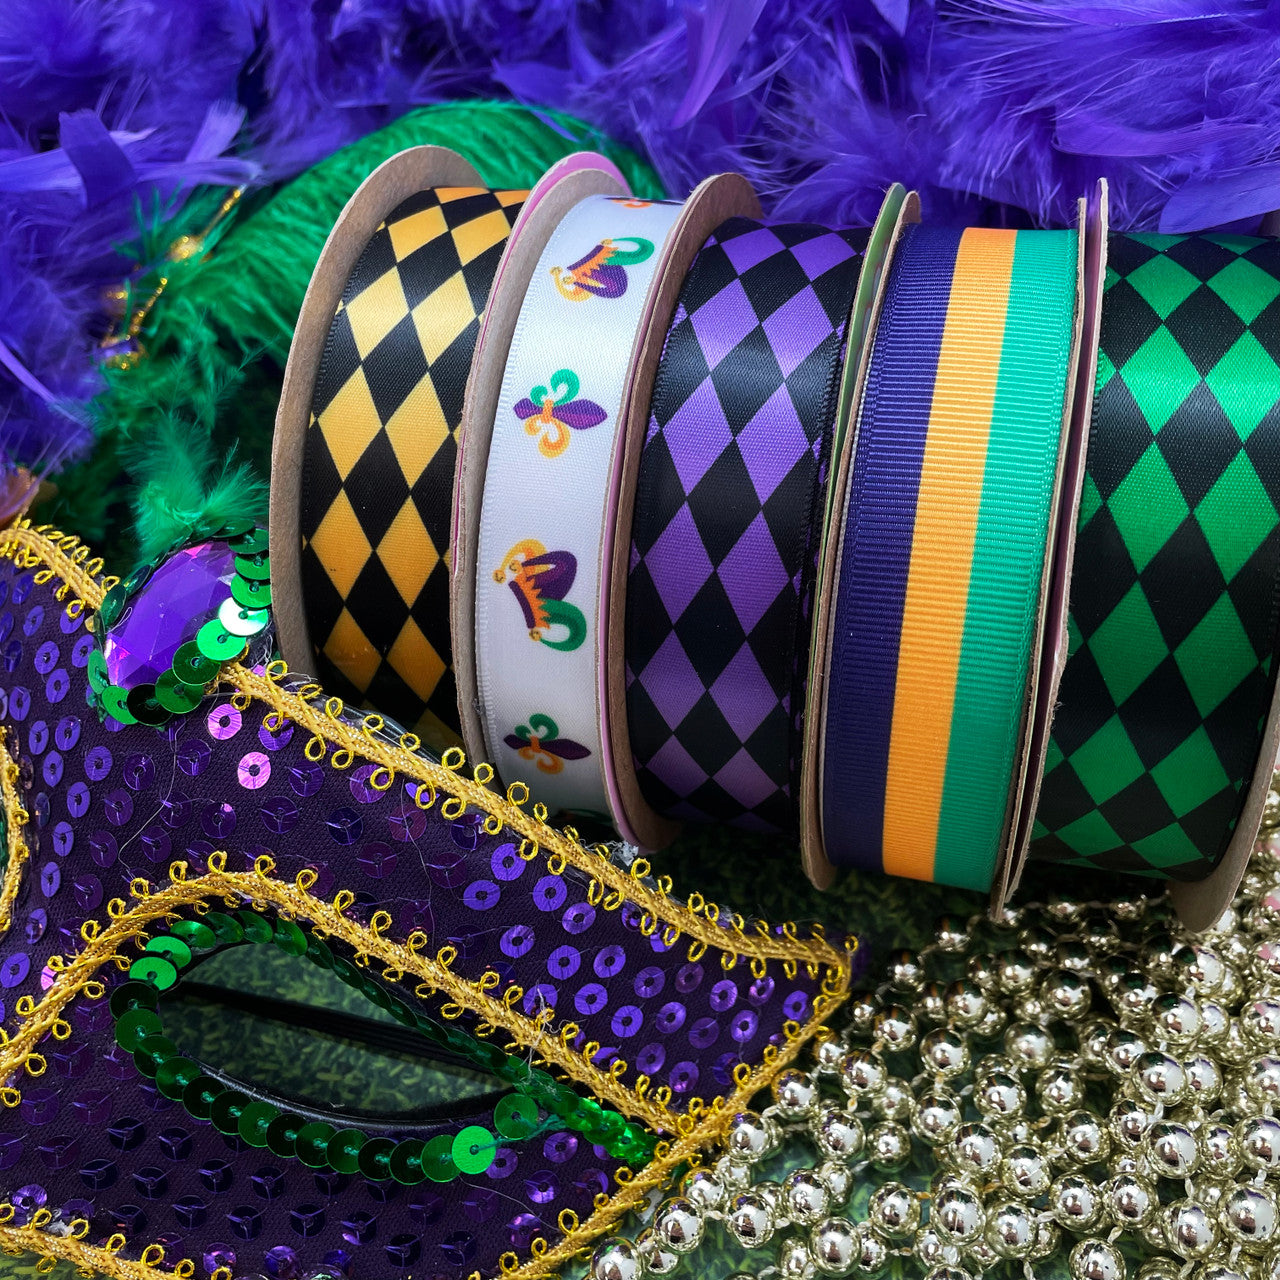 Mix and match our Mardi Gras  harlequin ribbons with the jester hats and stripes to create a beautiful Fat Tuesday themed craft project, wreath or quilt!